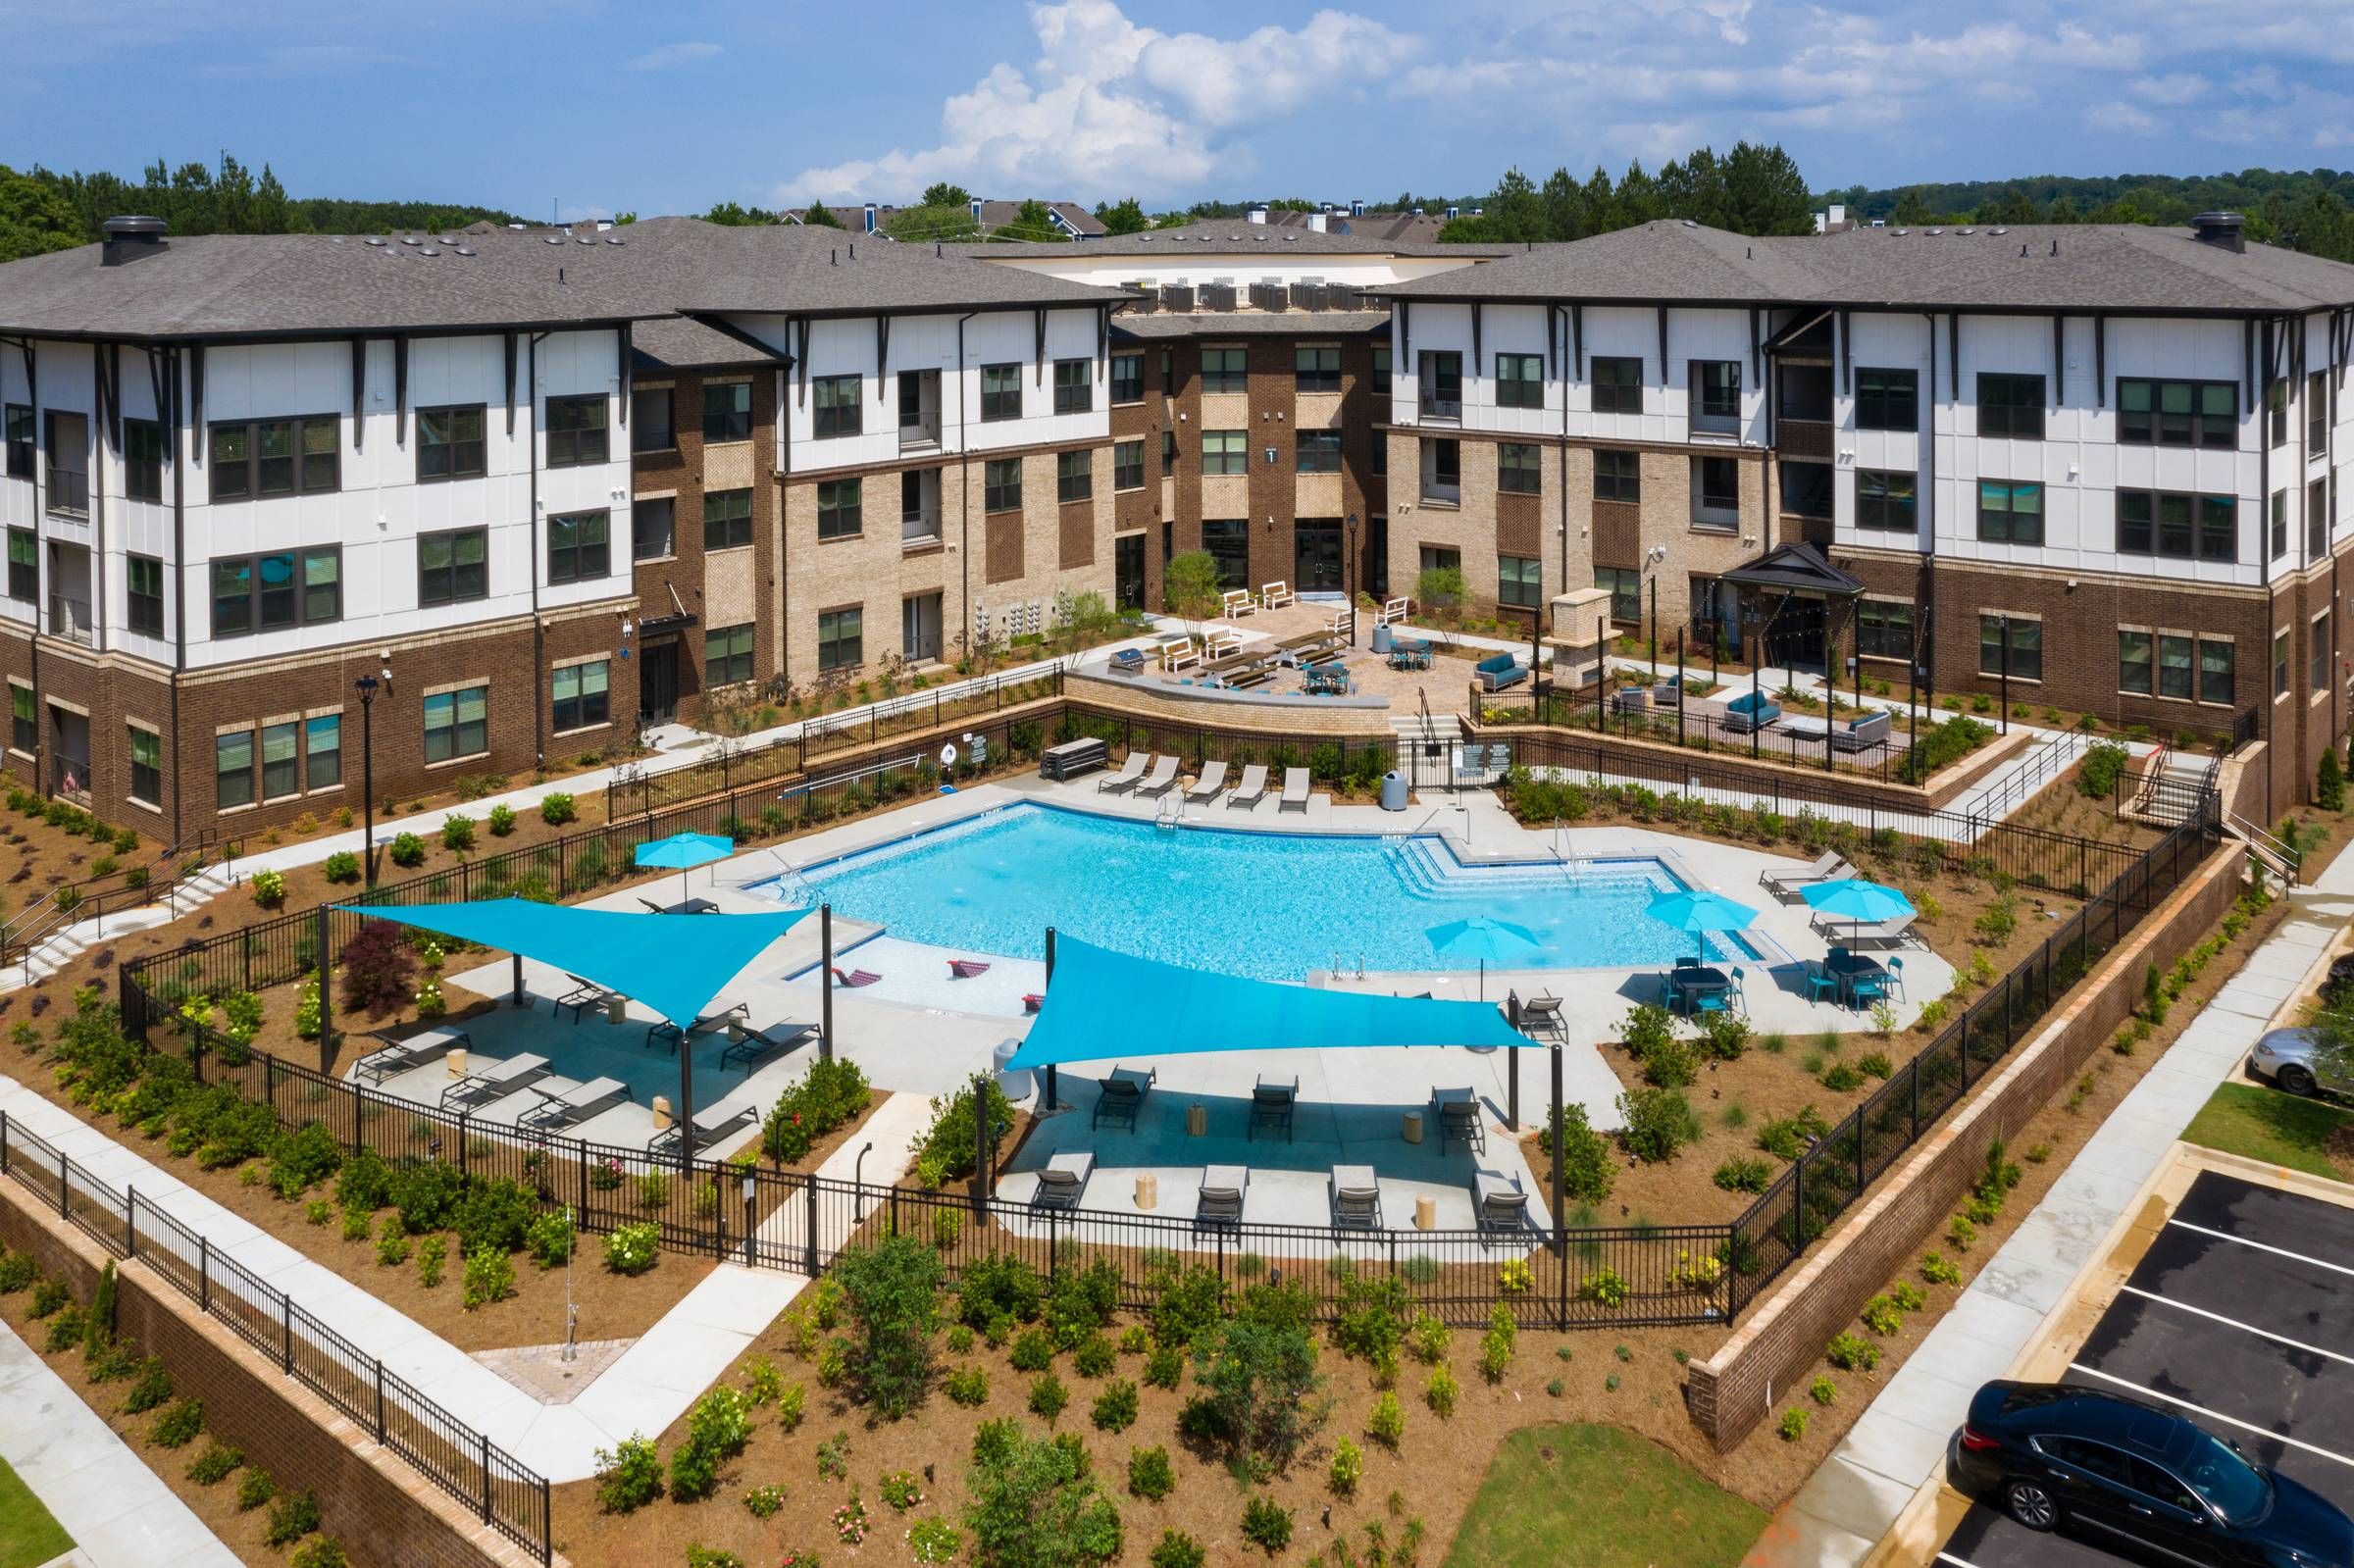 Aerial view of the Alta Sugarloaf apartment complex showcasing a large, L-shaped swimming pool with sun loungers and shade umbrellas.